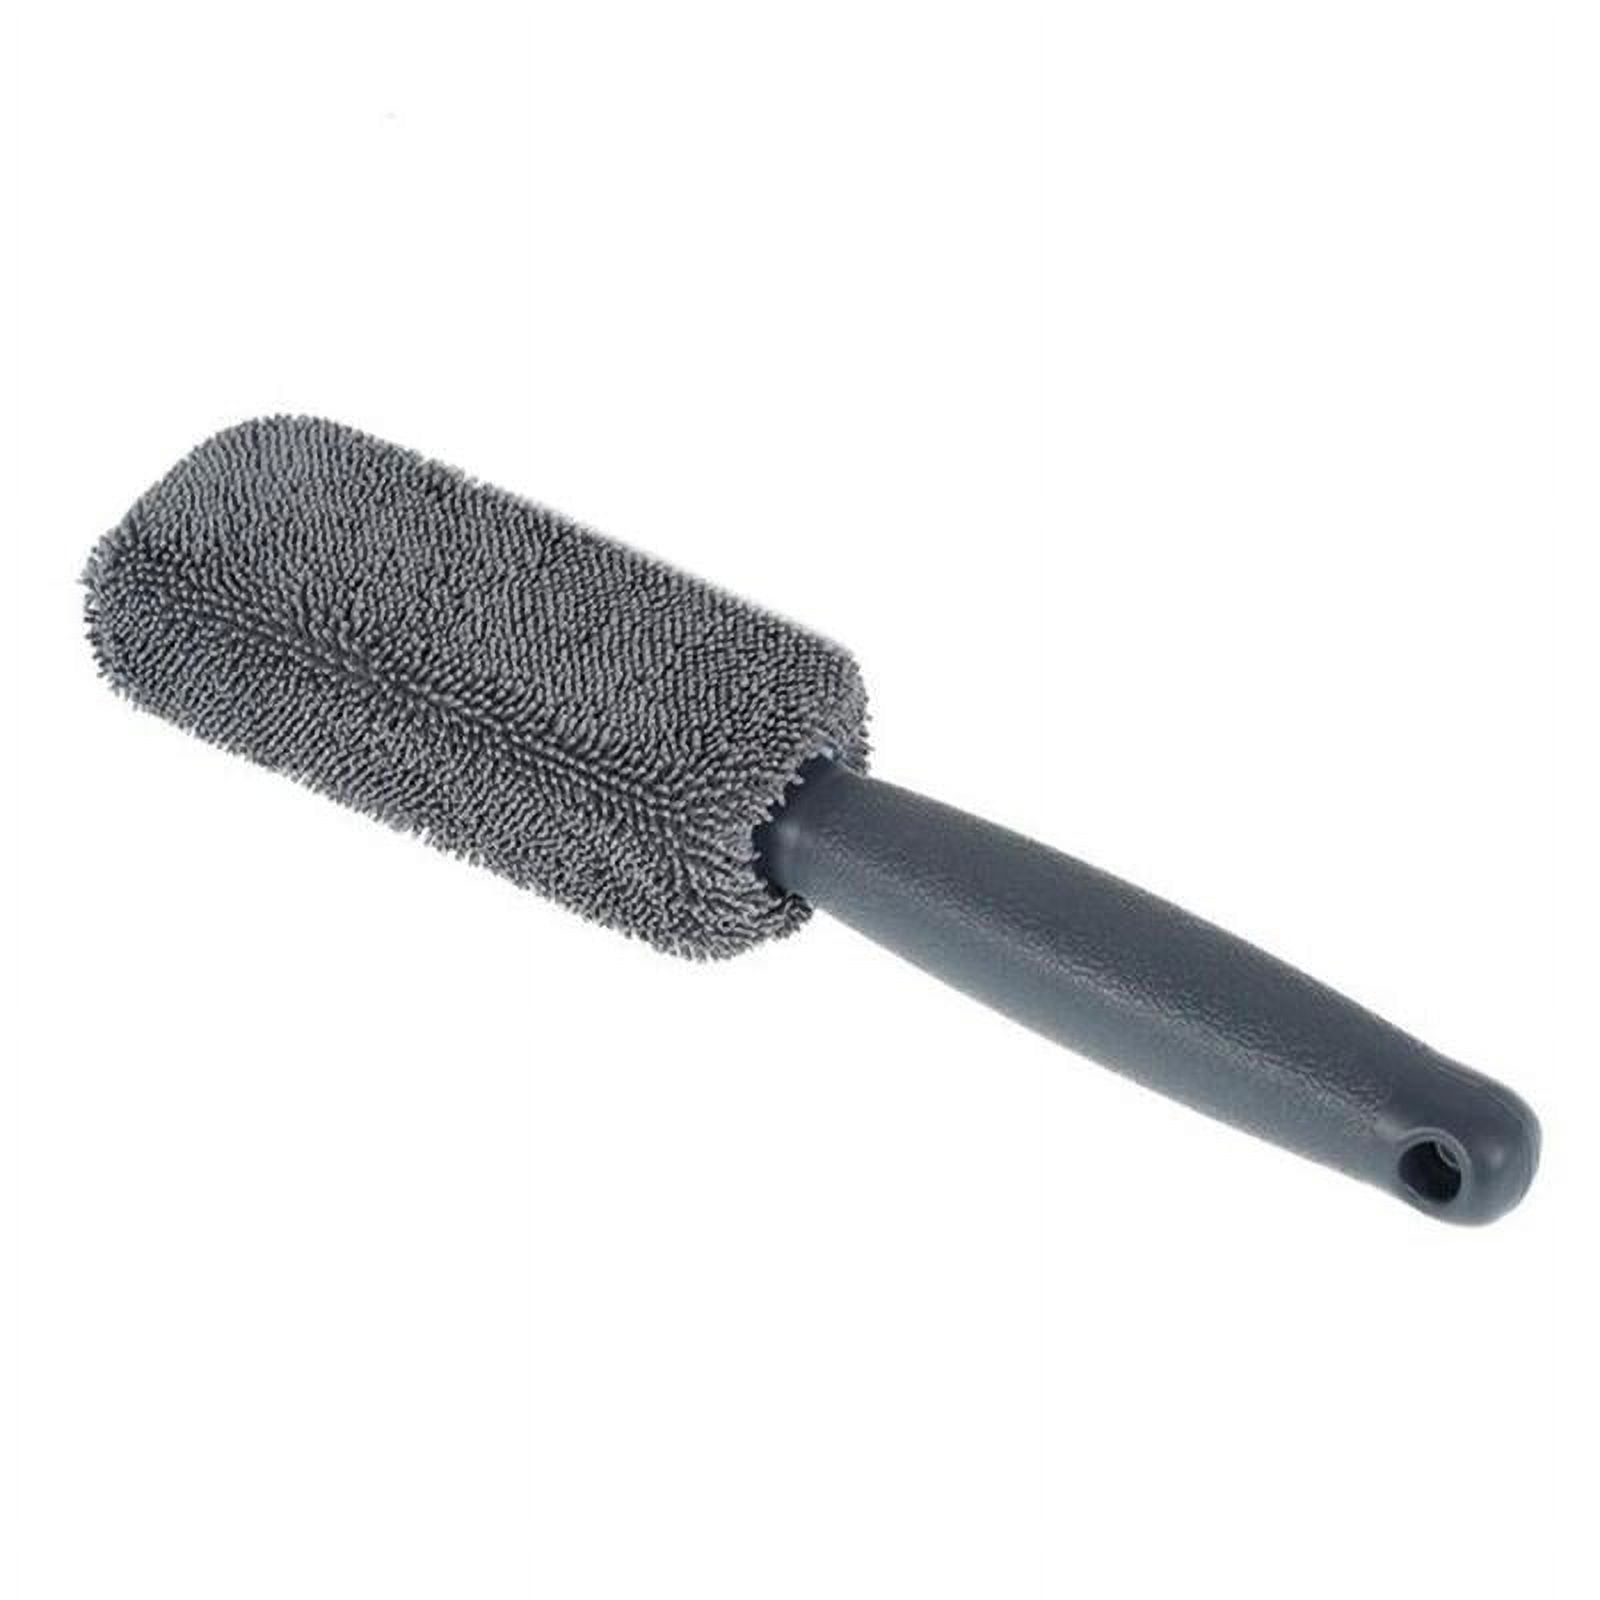 Baosity Car Wheel Tire Cleaning Brush Tool, Rim Scrubber Detailing Brush Lightweight Grooming Brush Long Handle Truck for Vehicle Motorcycles, Size: 28 cm